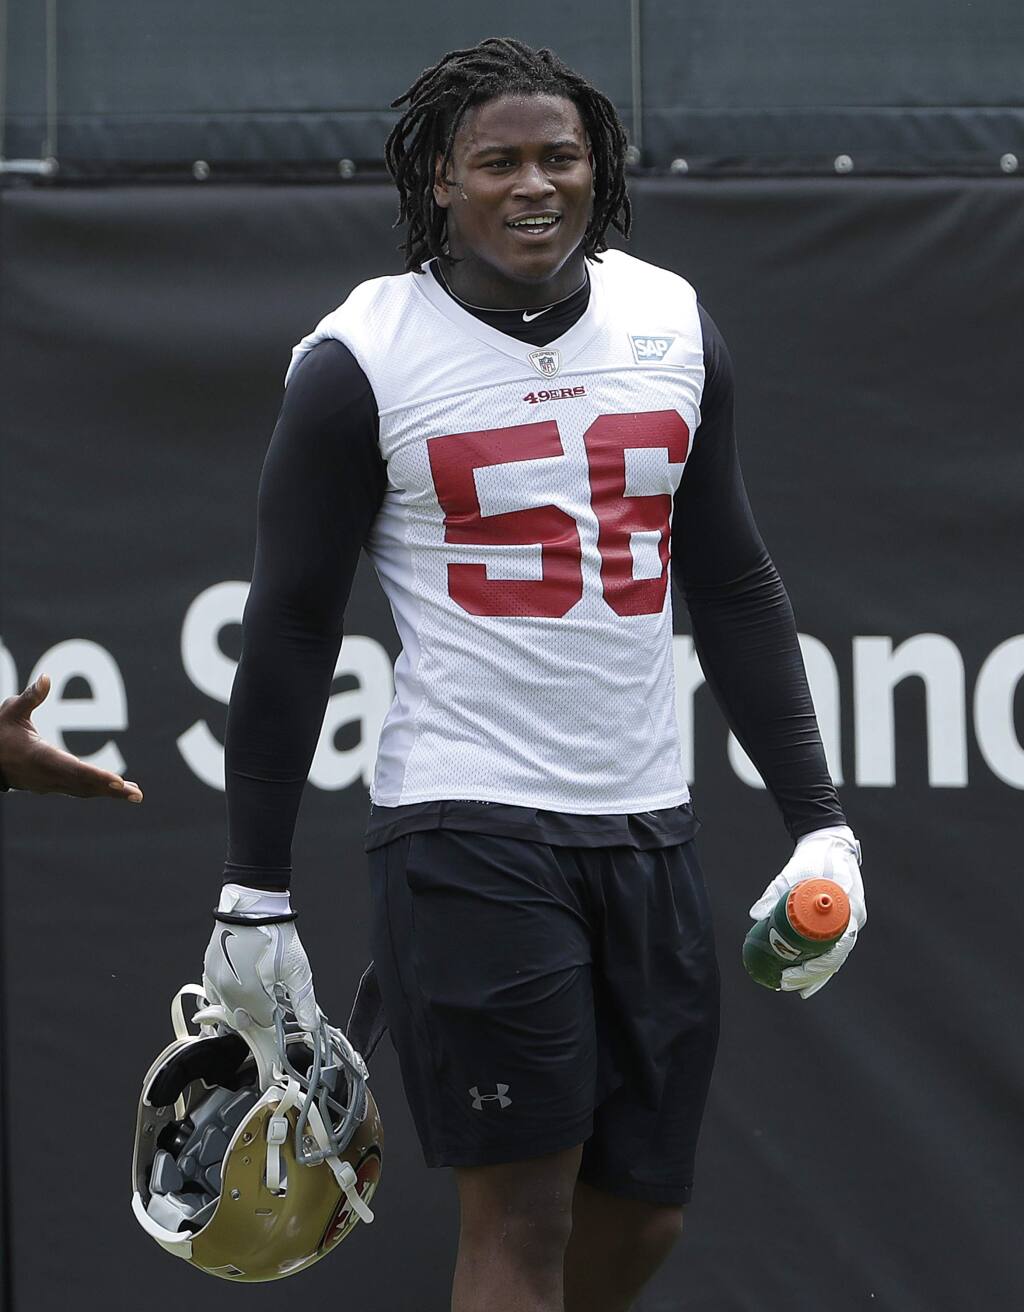 San Francisco 49ers linebacker Reuben Foster walks on the field during a practice at the team's training facility in Santa Clara, Wednesday, May 30, 2018. (AP Photo/Jeff Chiu)